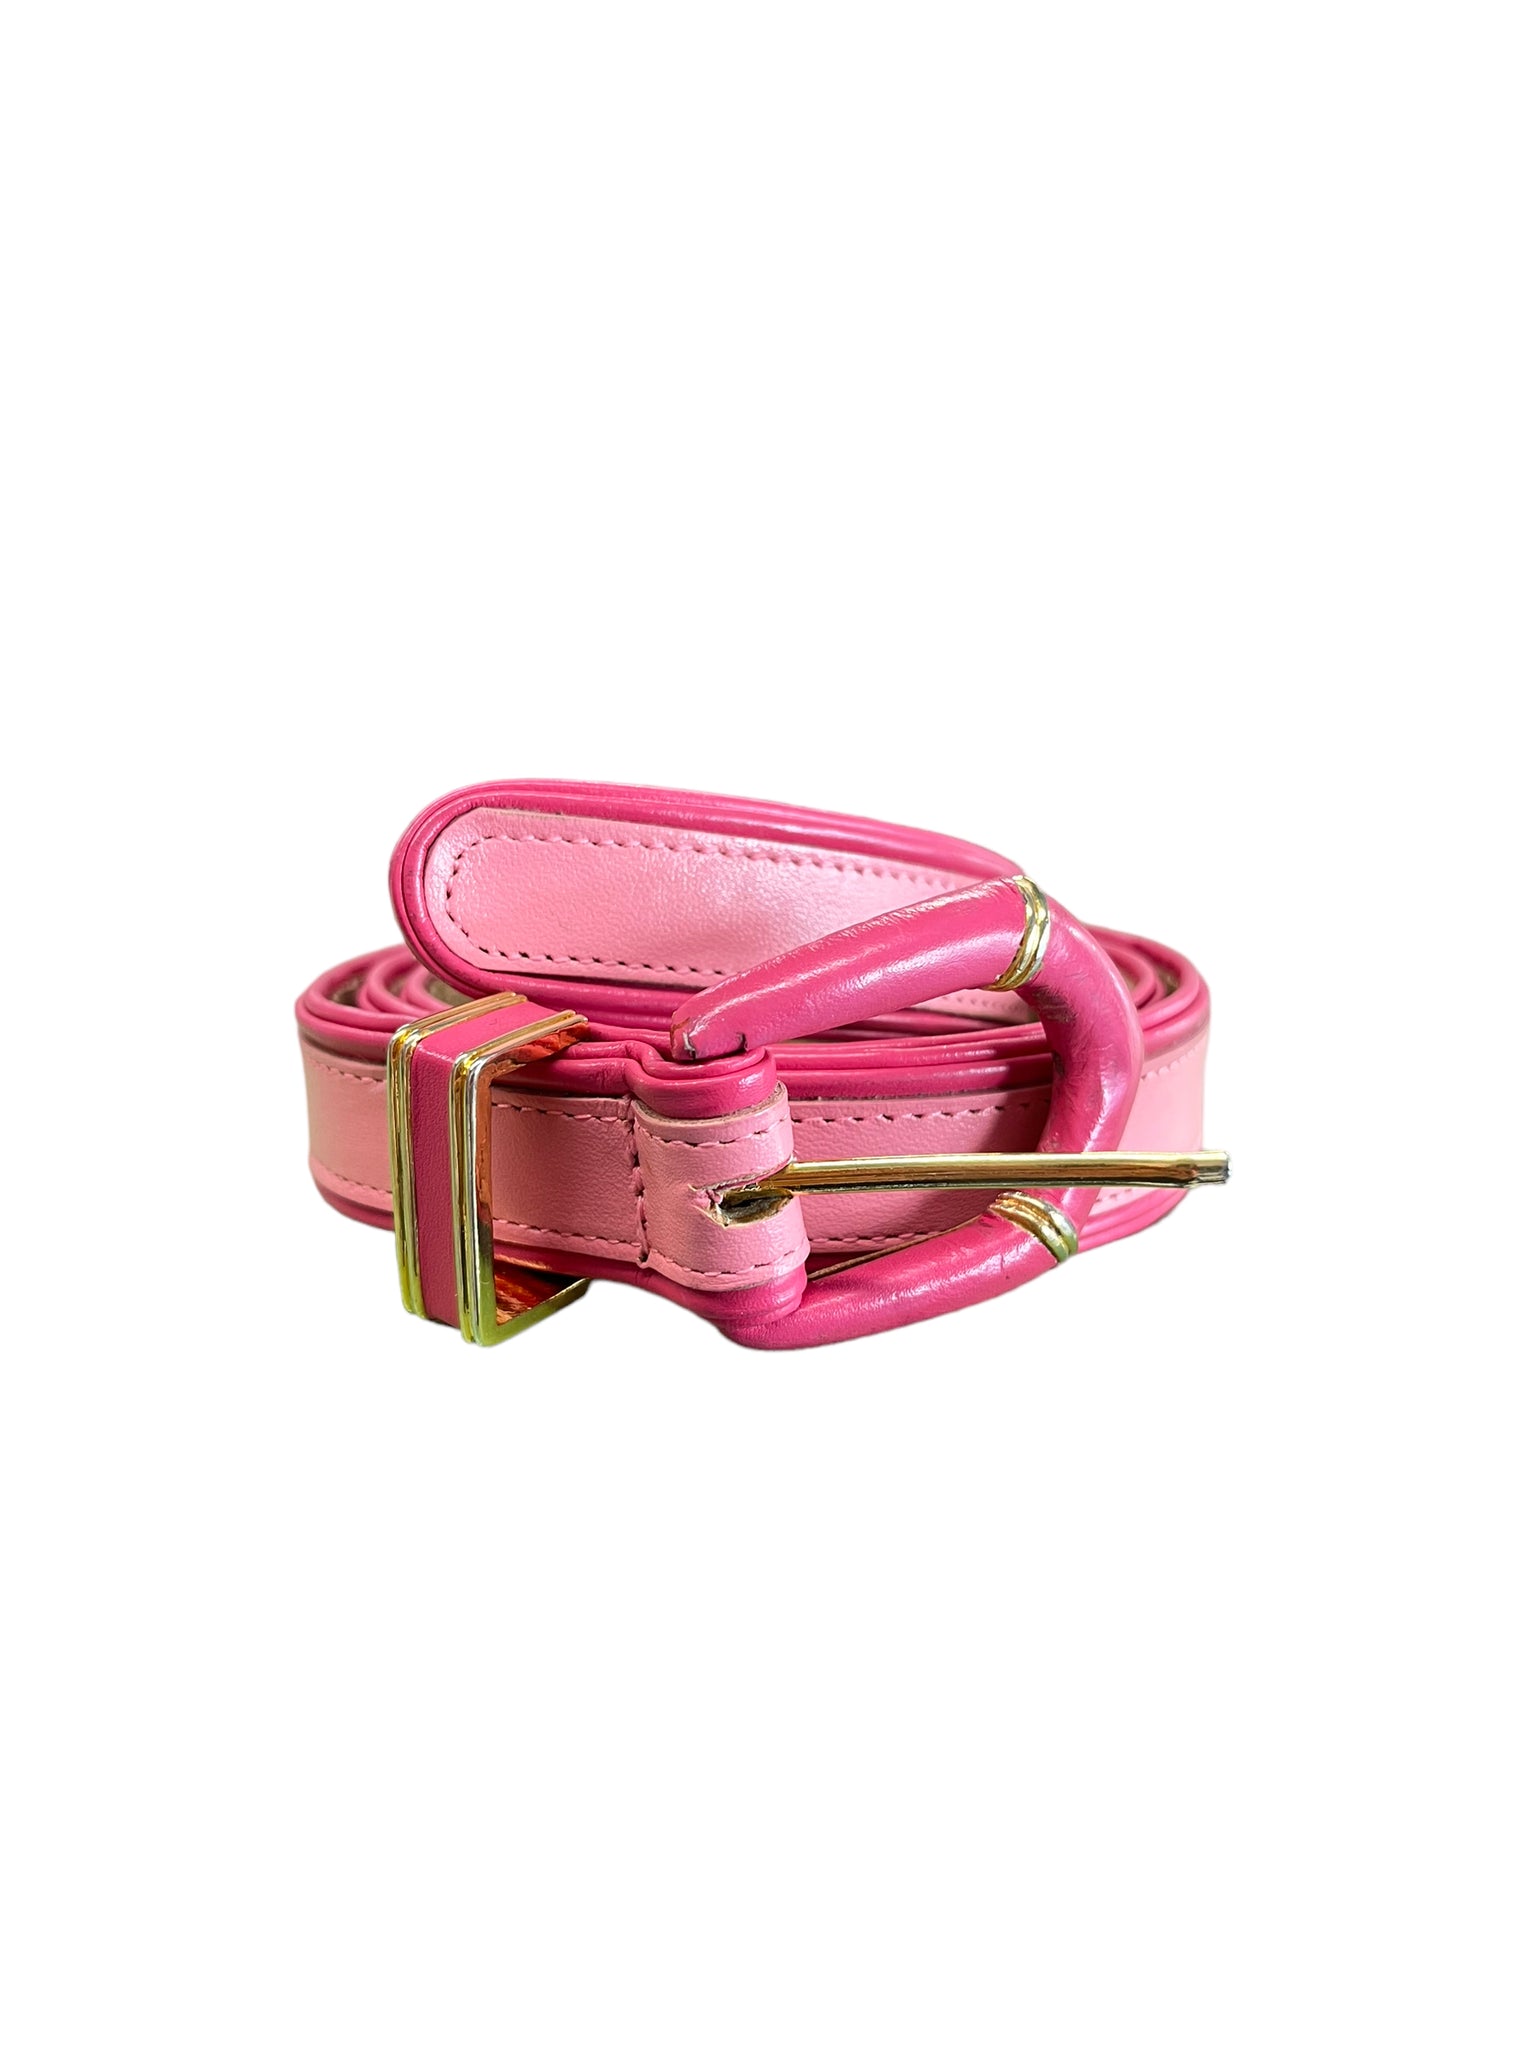 80s Two Toned Pink Belt